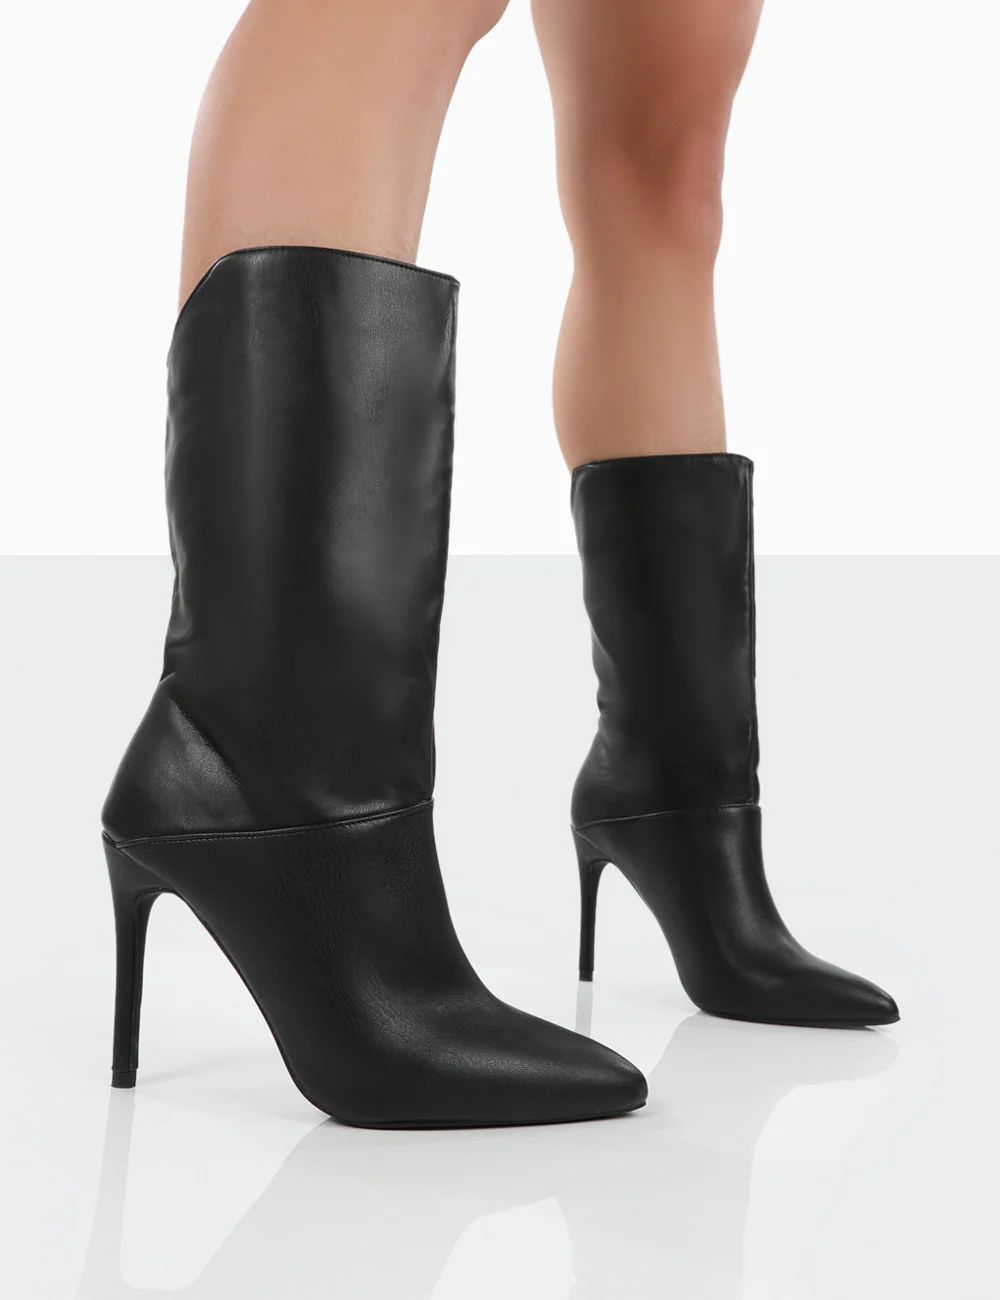 Lisel Black PU Pointed Toe Heeled Ankle Boots | Public Desire